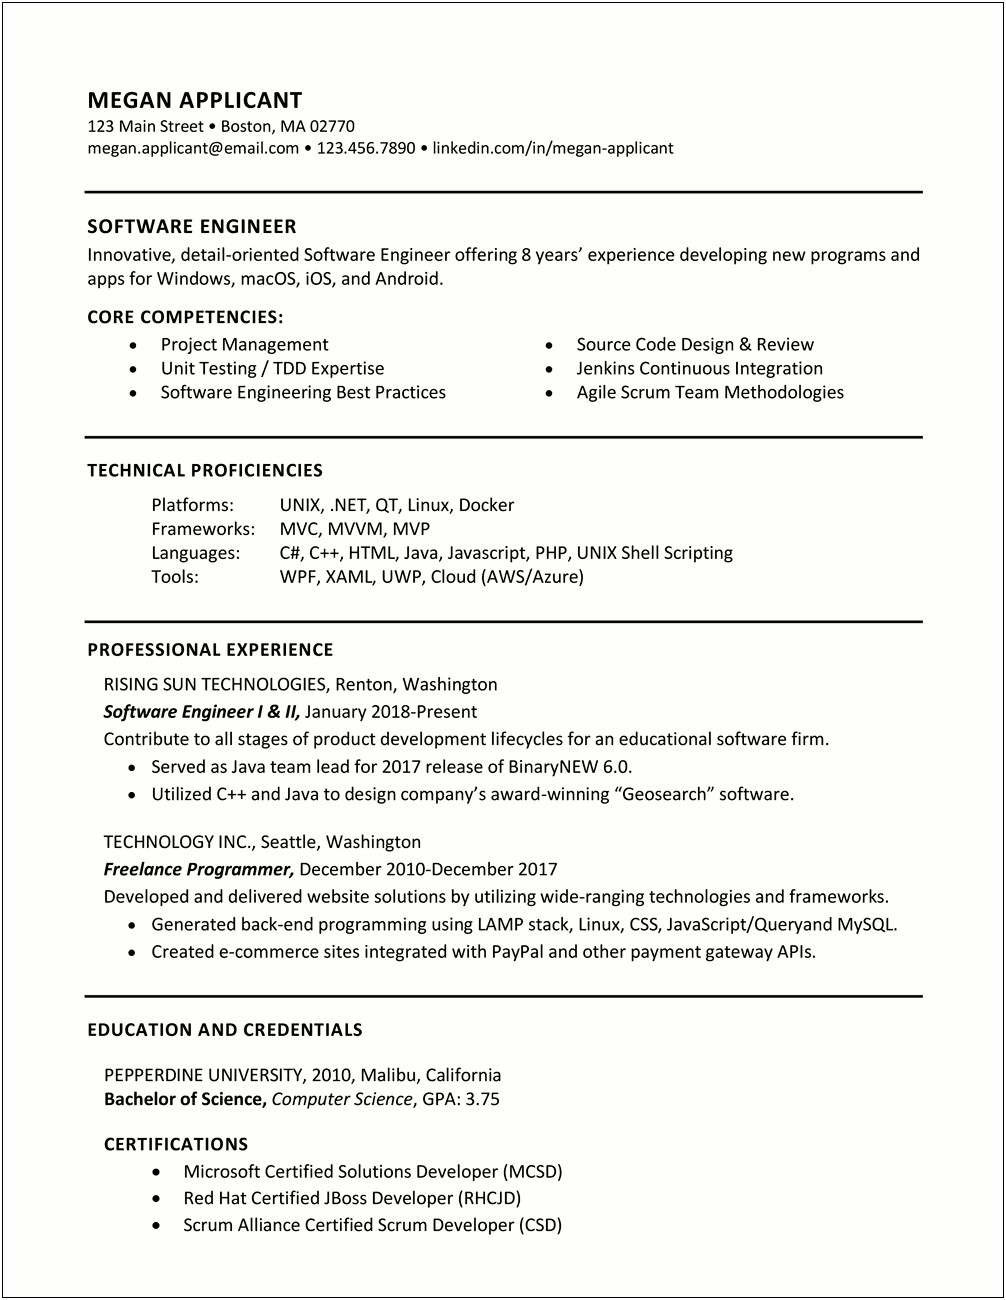 Good Attributes To Have On A Resume